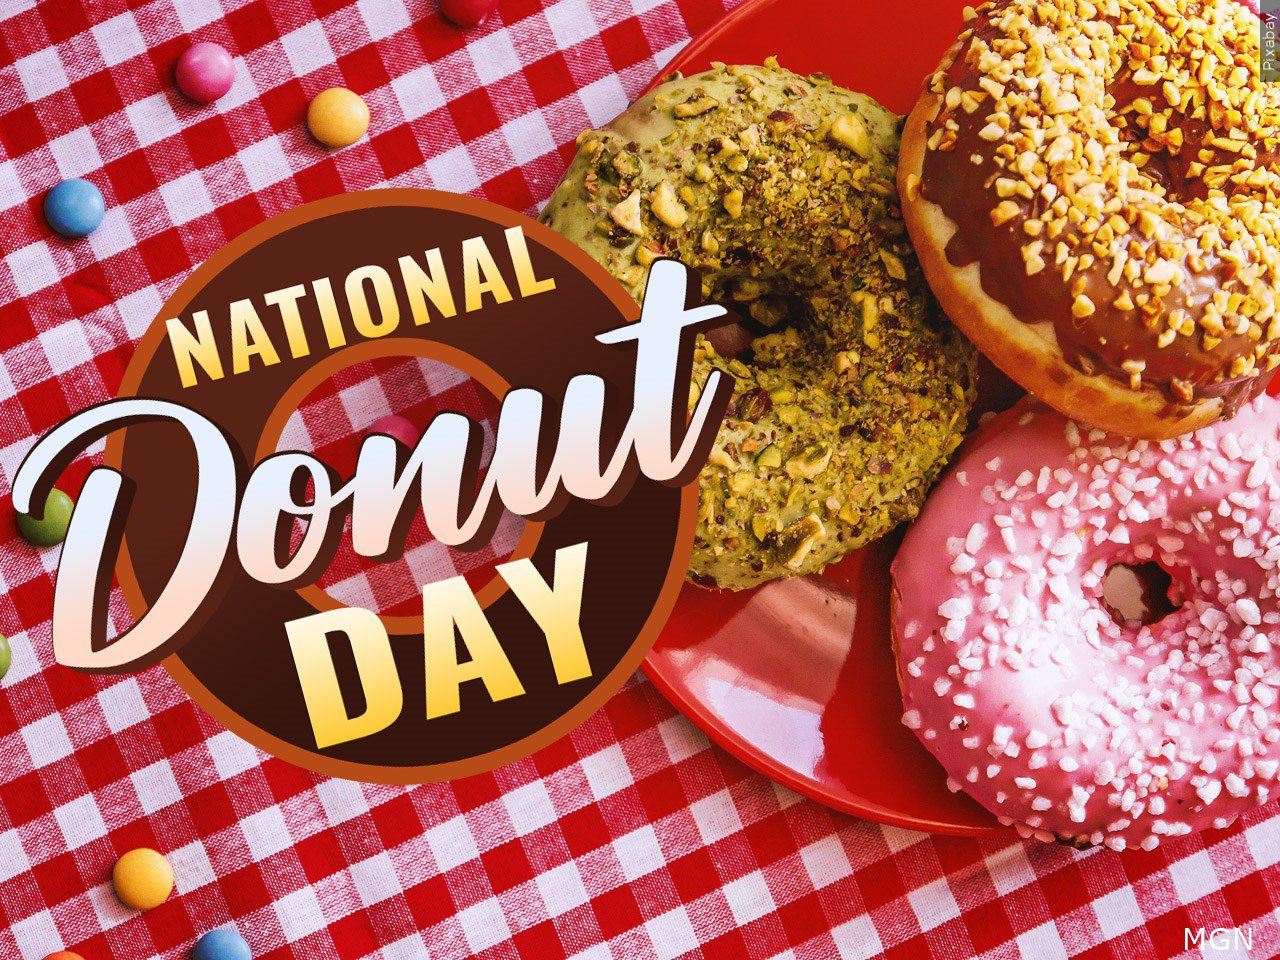 A sweet gift on National Donut Day ABC 6 News